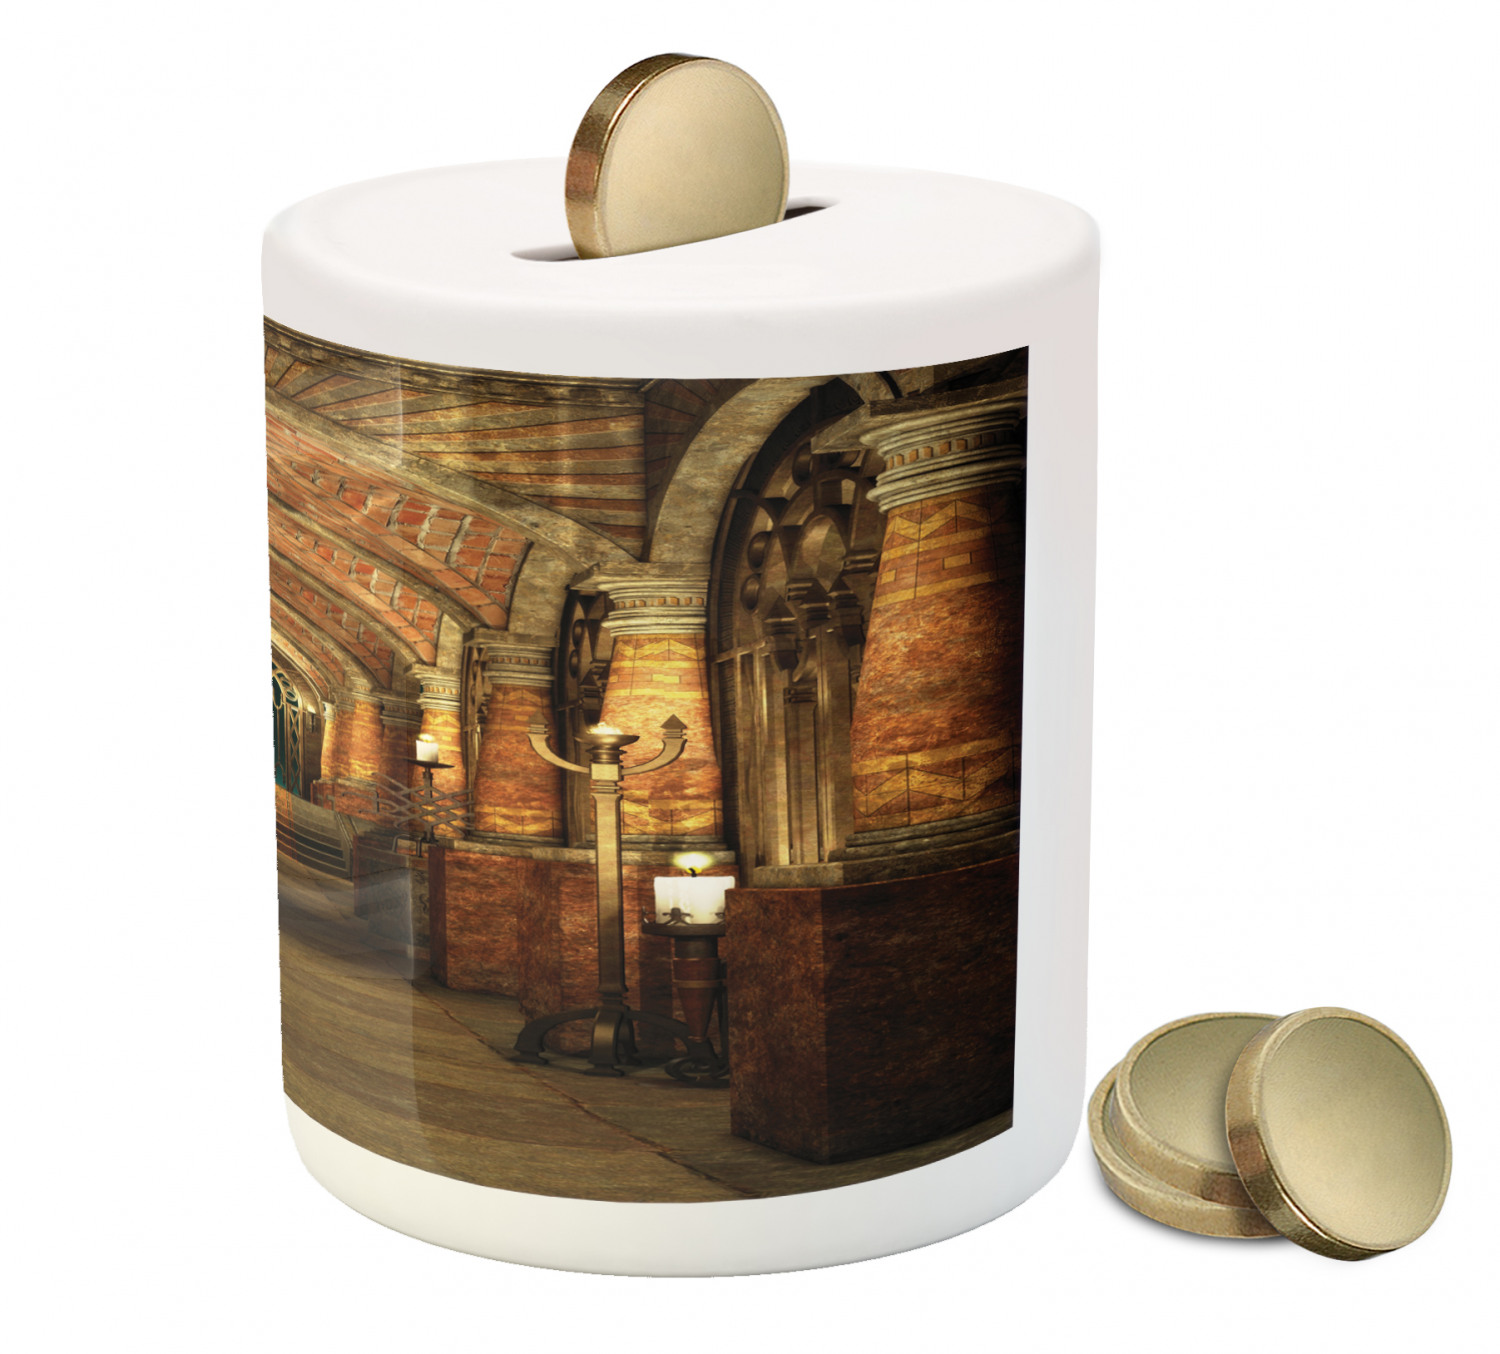 Gothic Piggy Bank, Passage Stairways Secret Gateway Pillars Medieval Building Theme, Ceramic Coin Bank Money Box for Cash Saving, 3.6" X 3.2", Brown and Red, by Ambesonne - image 3 of 4